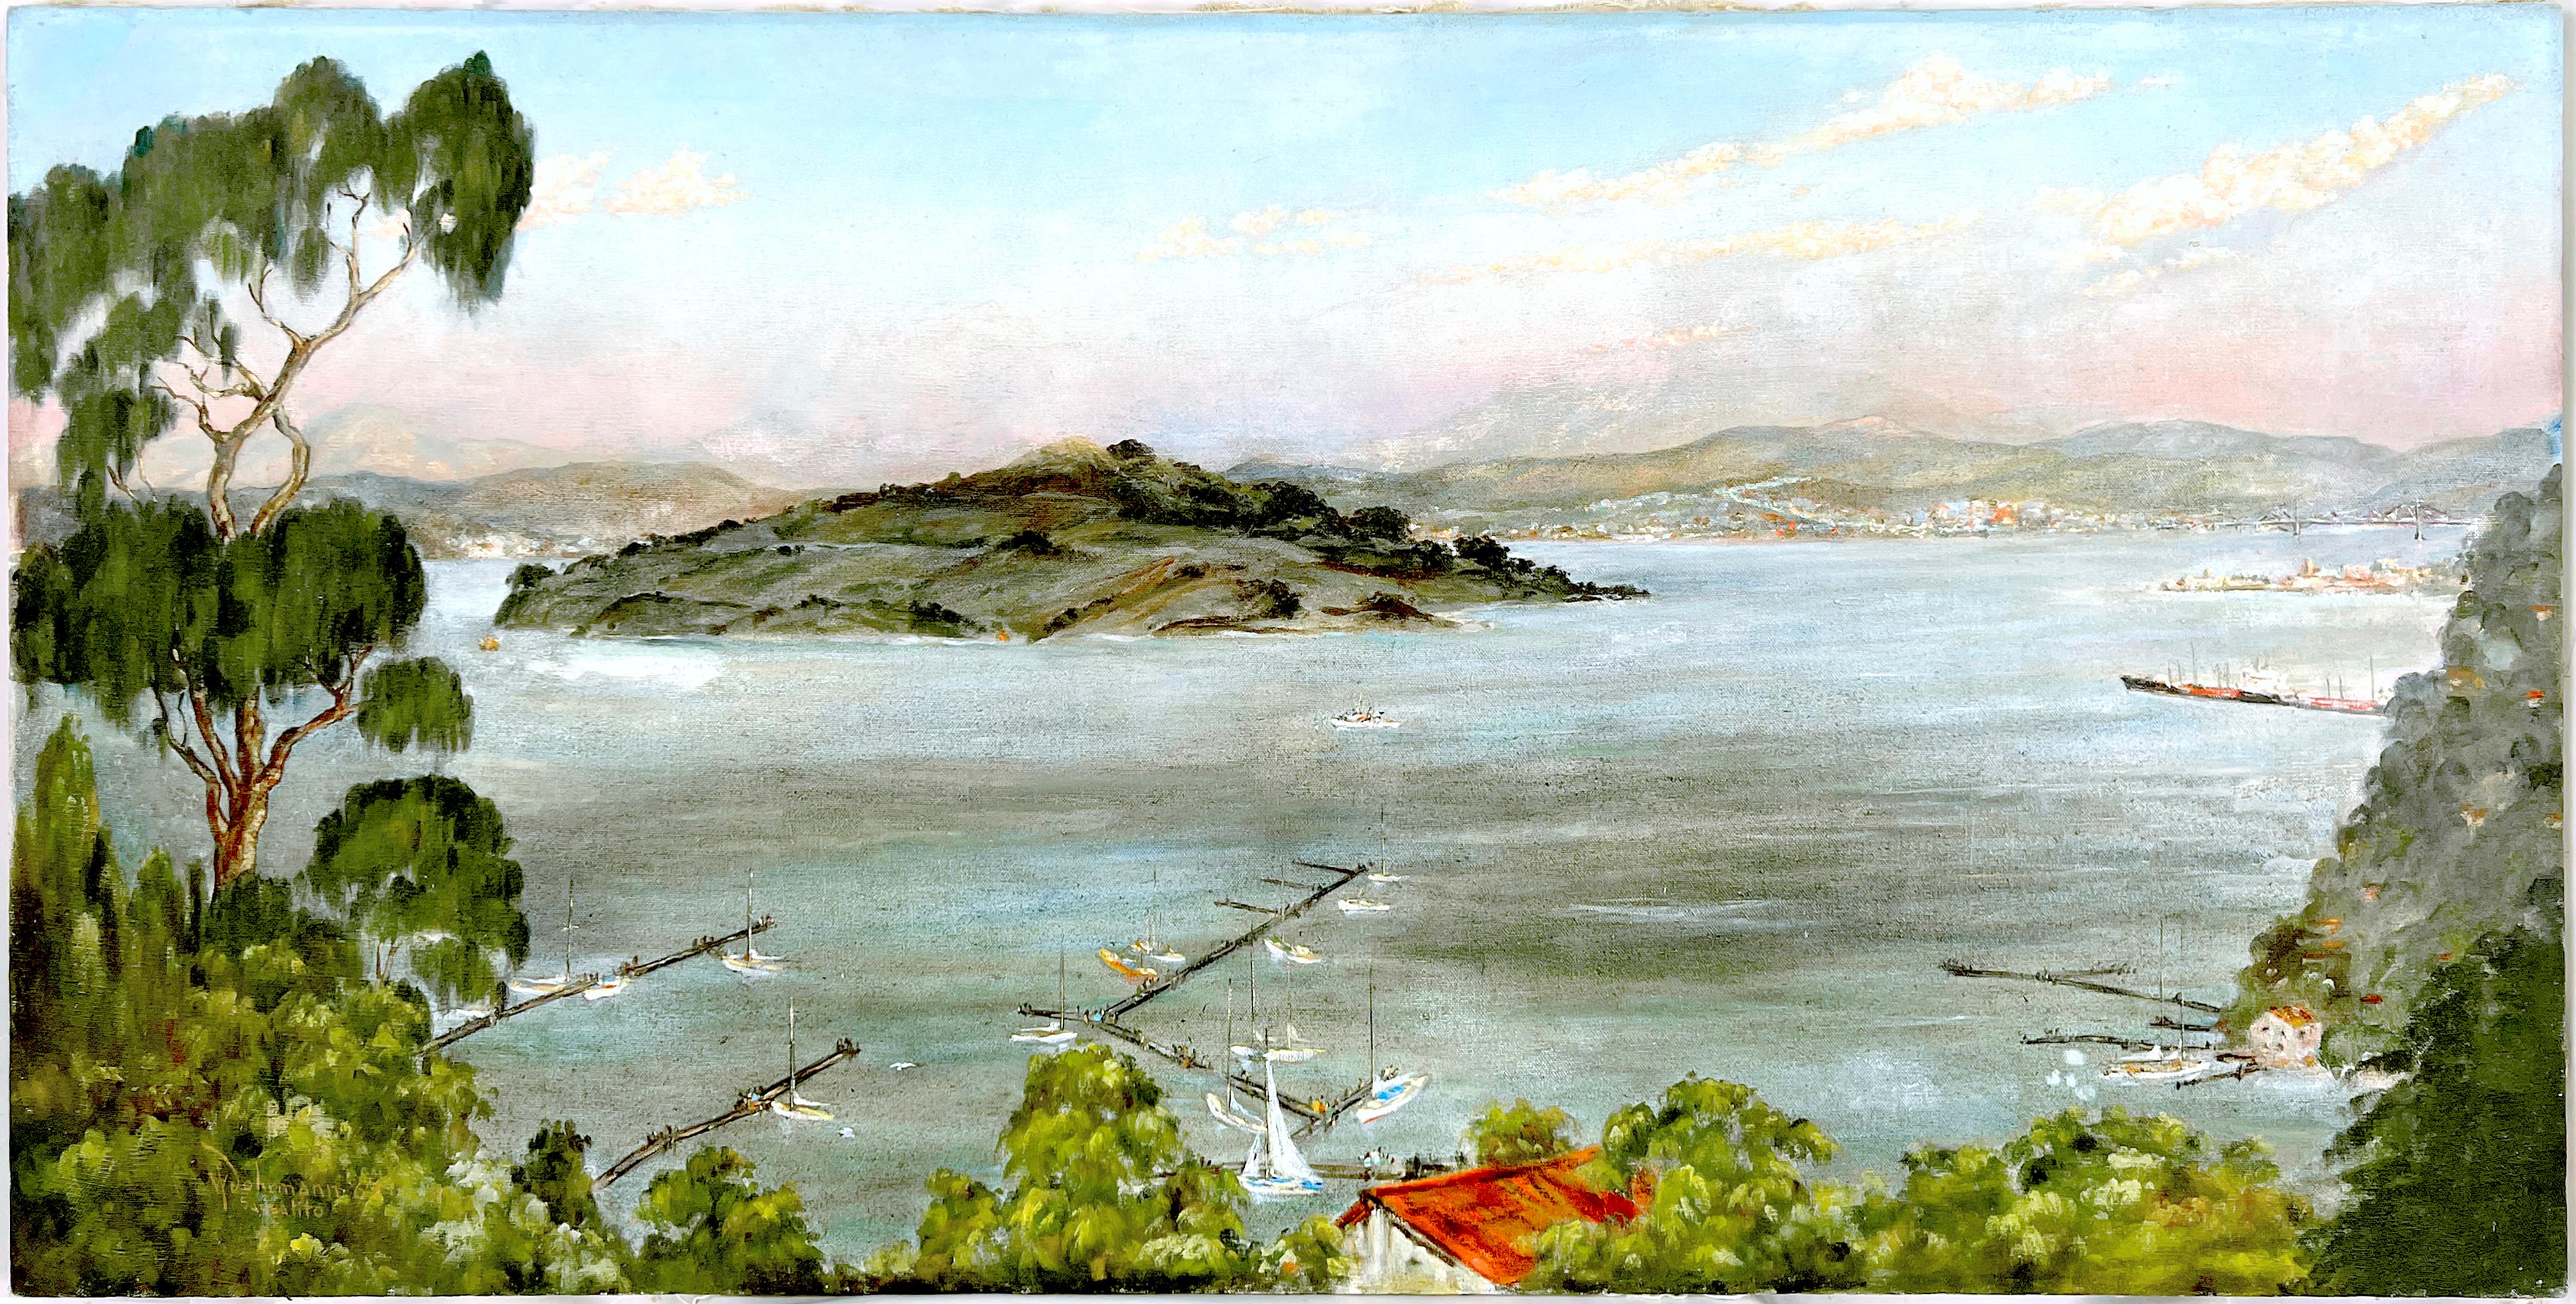 William Frederick Dohrmann Figurative Painting - "Sausalito" Harbor and Angel Island Mountains - Sail Boats - Oil on Canvas 1963